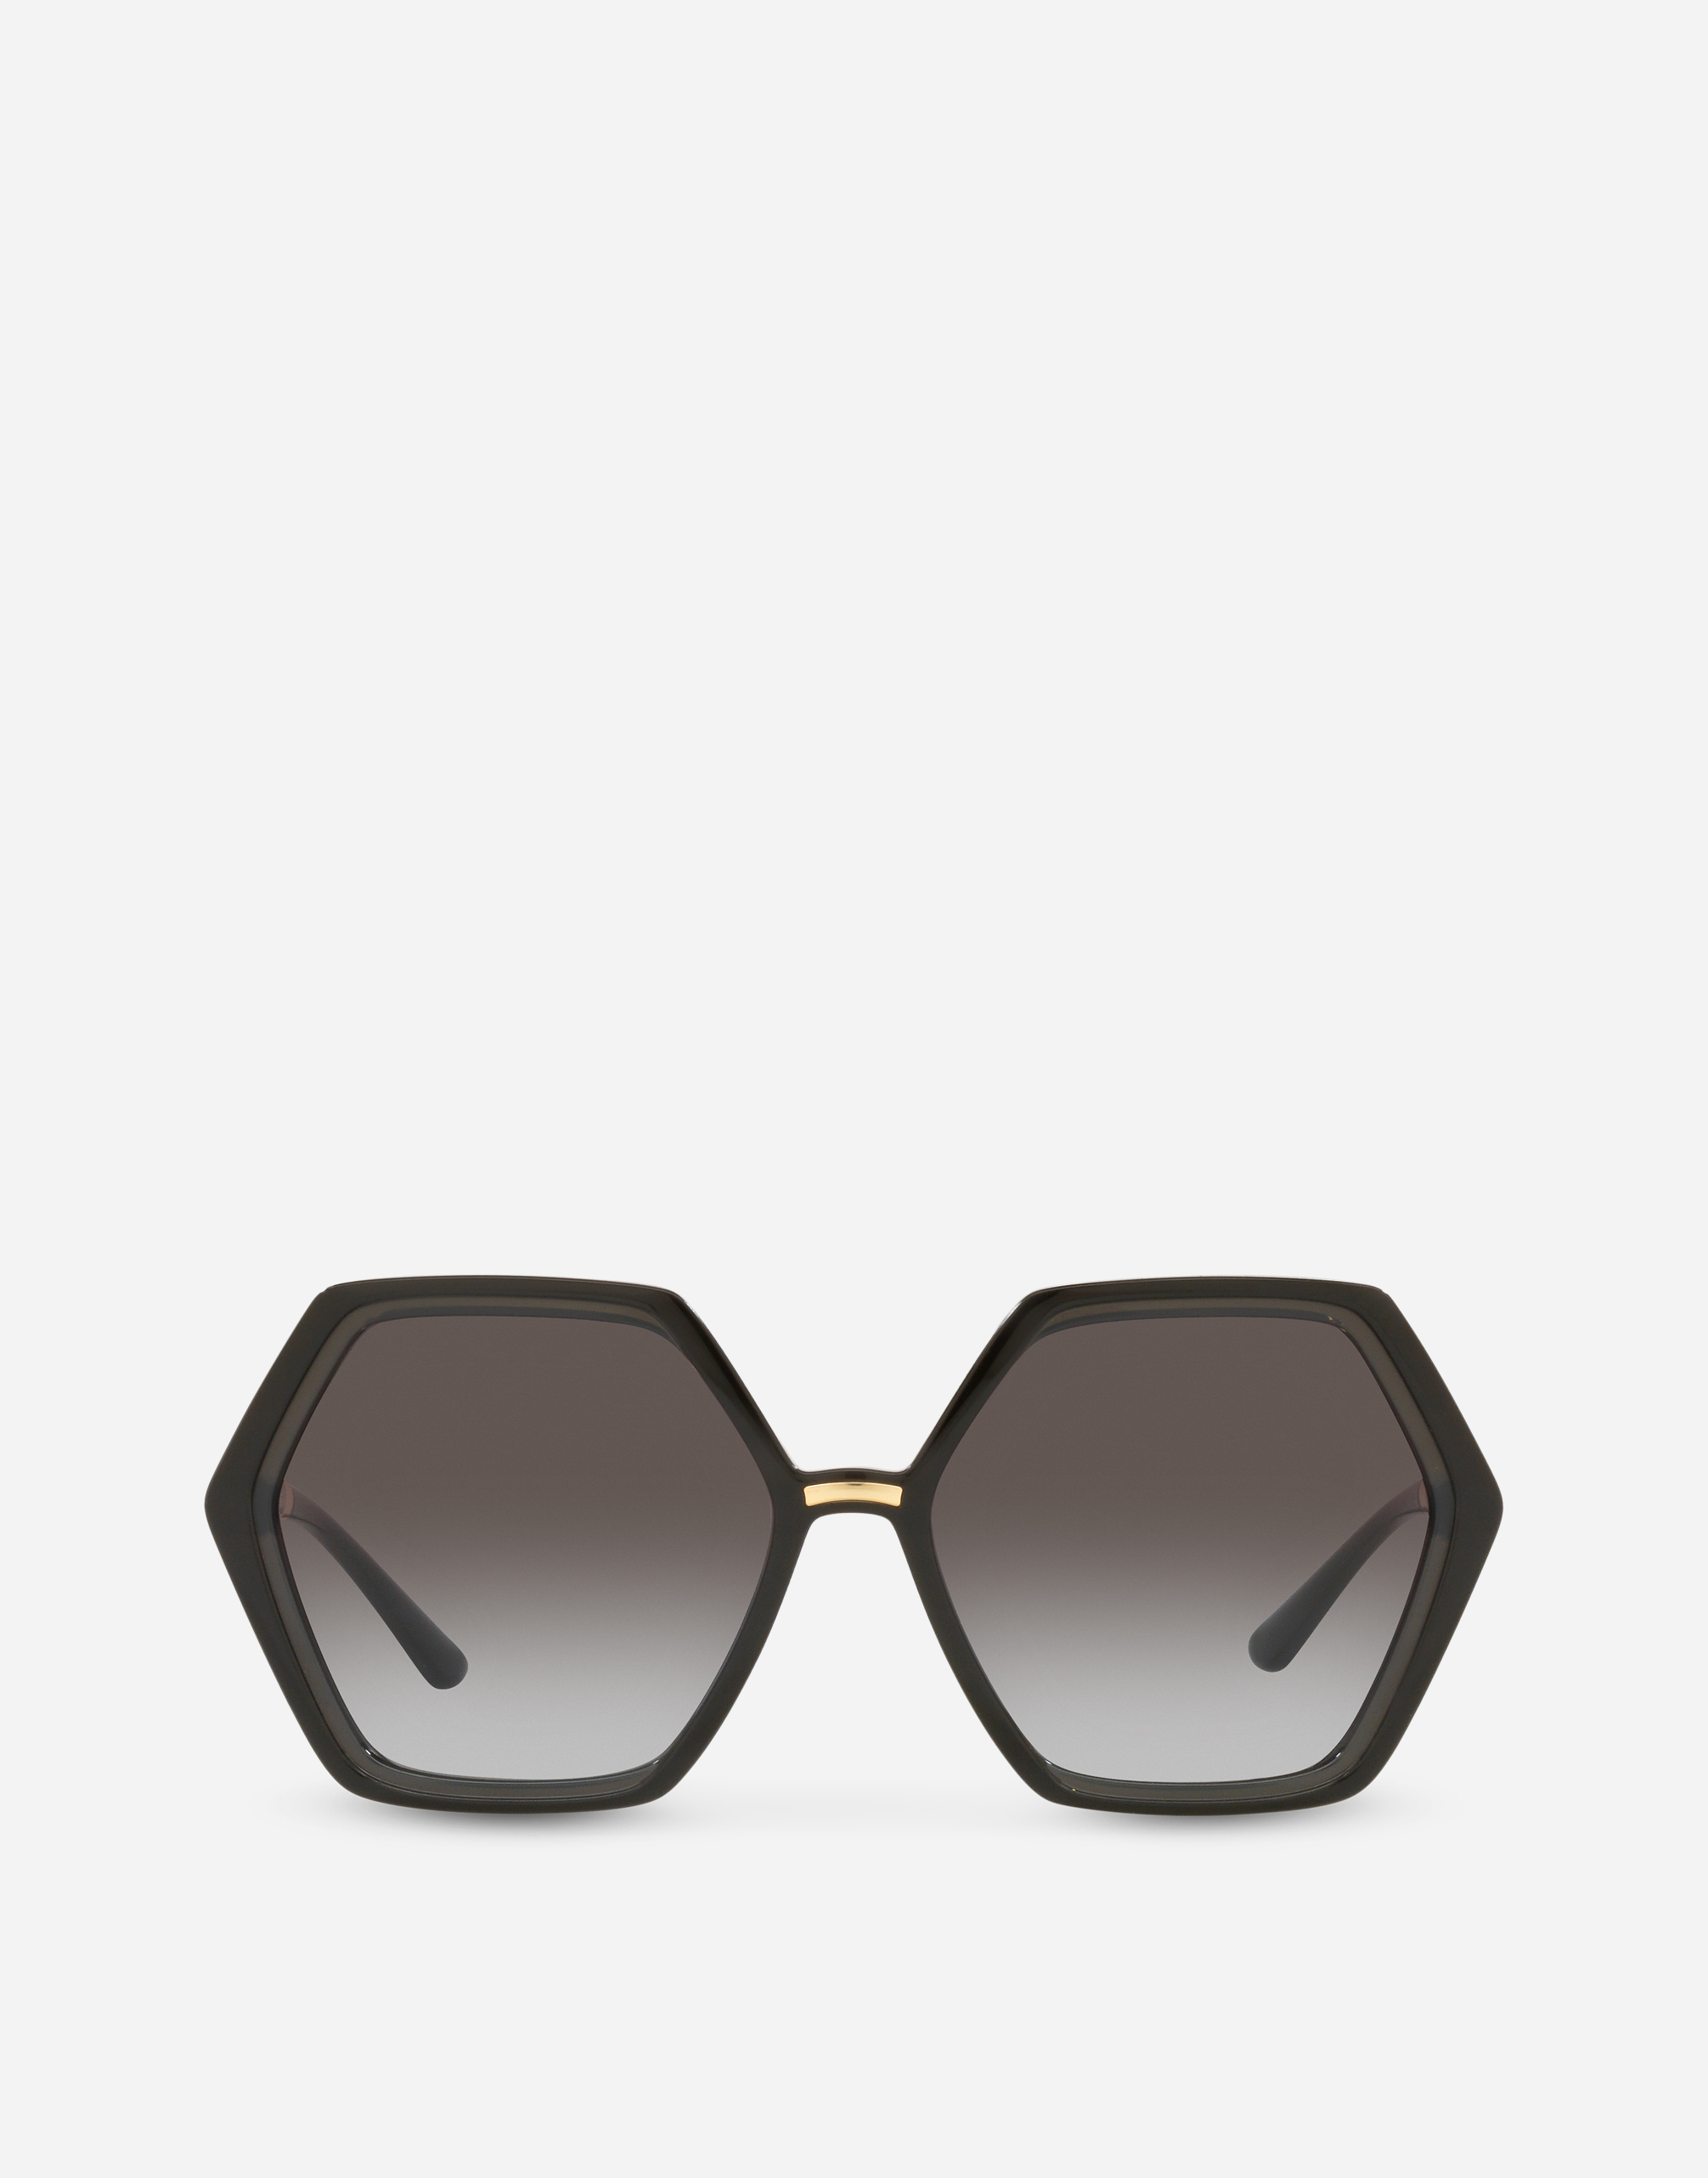 Line sunglasses in Black and grey transparent